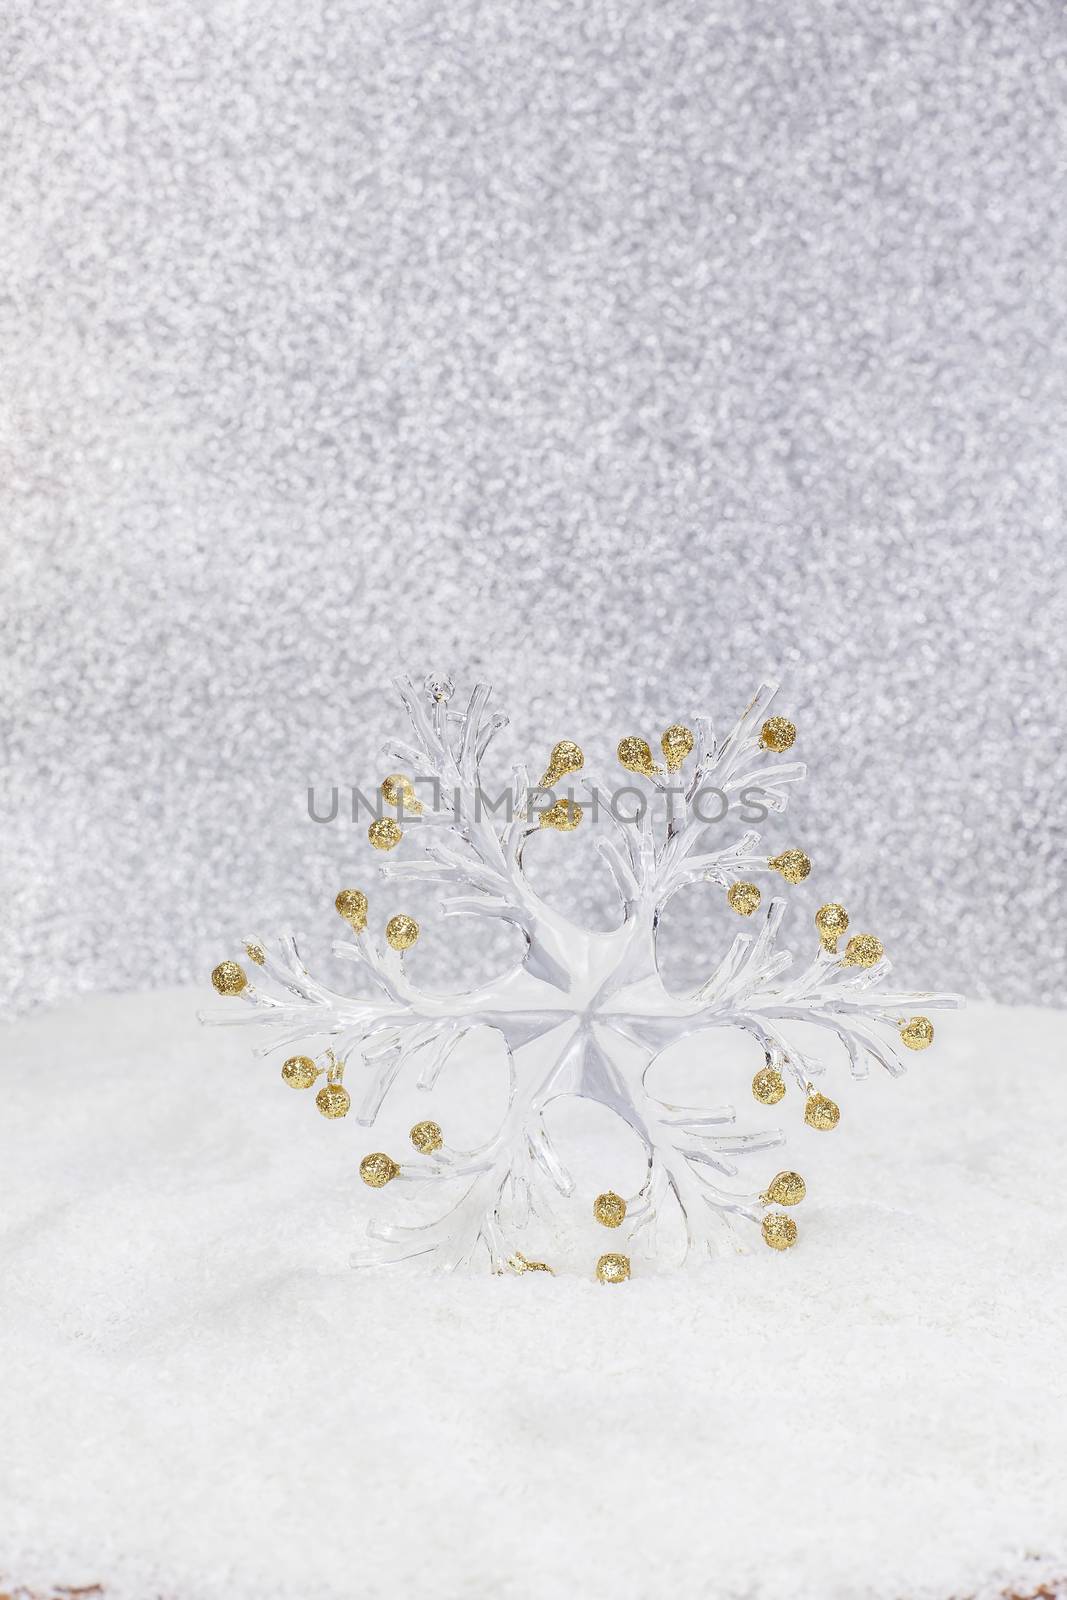 Snowflake on glitter background with bokeh effect and place for text. High key with shallow depth of field